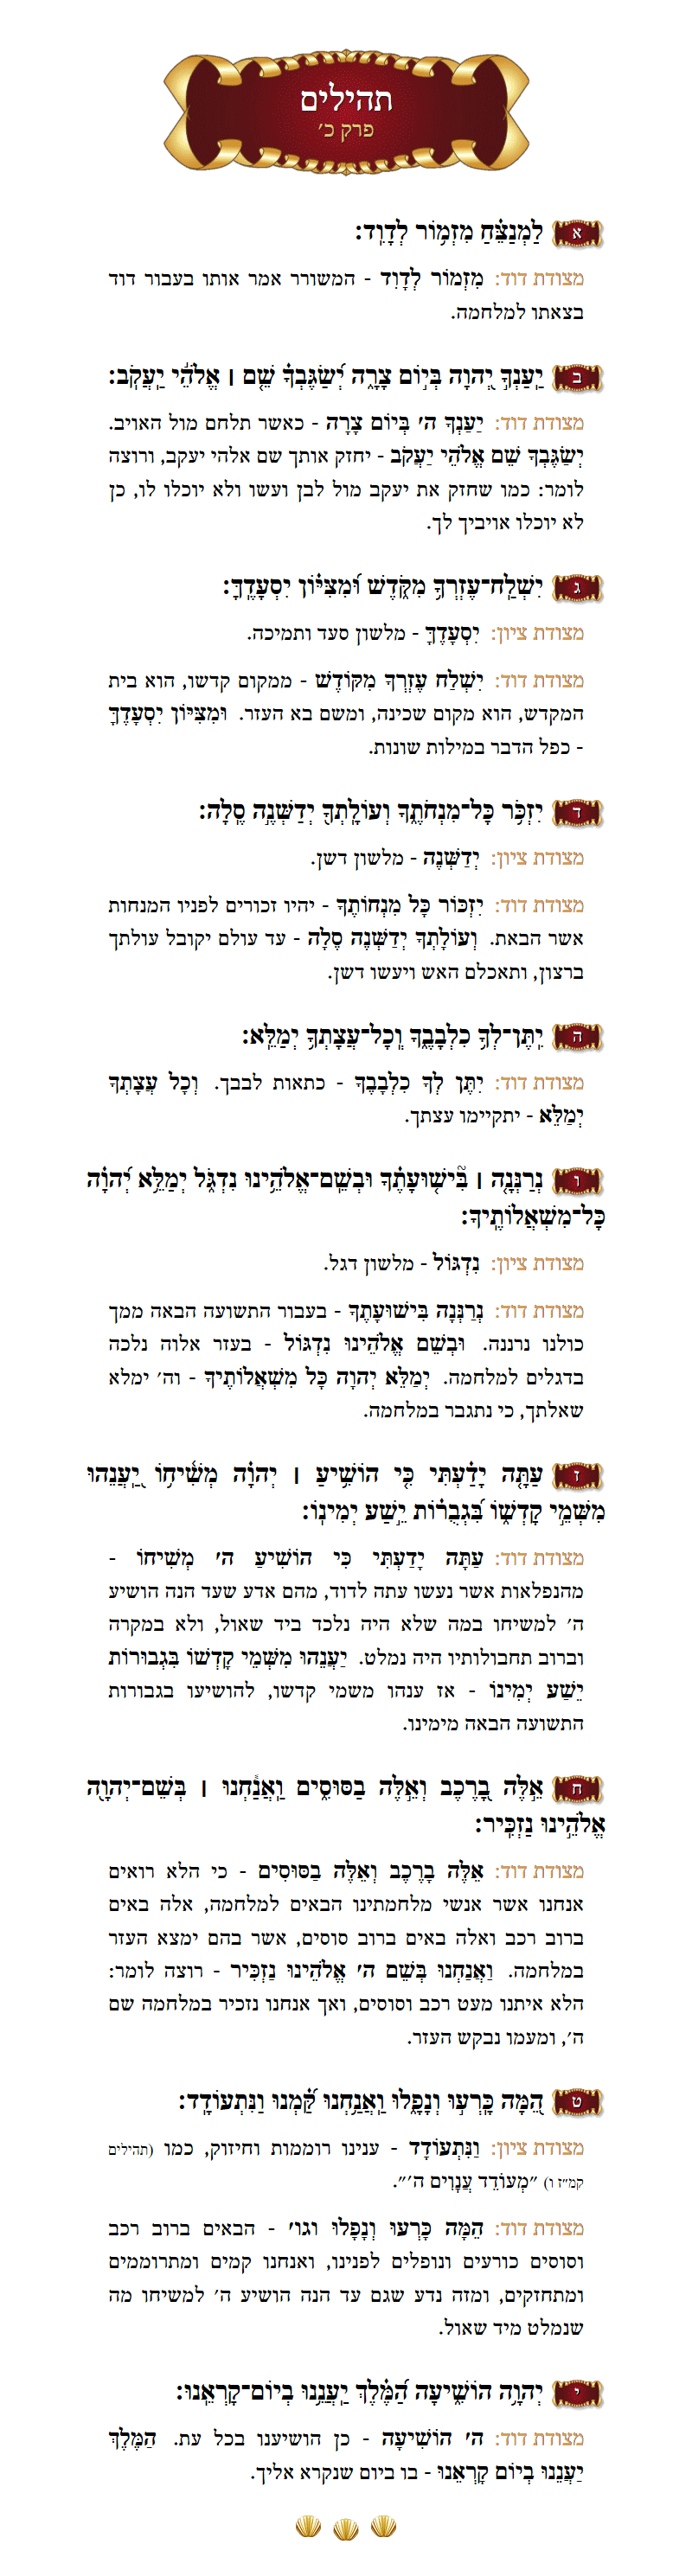 Sefer Tehillim Chapter 20 with commentary